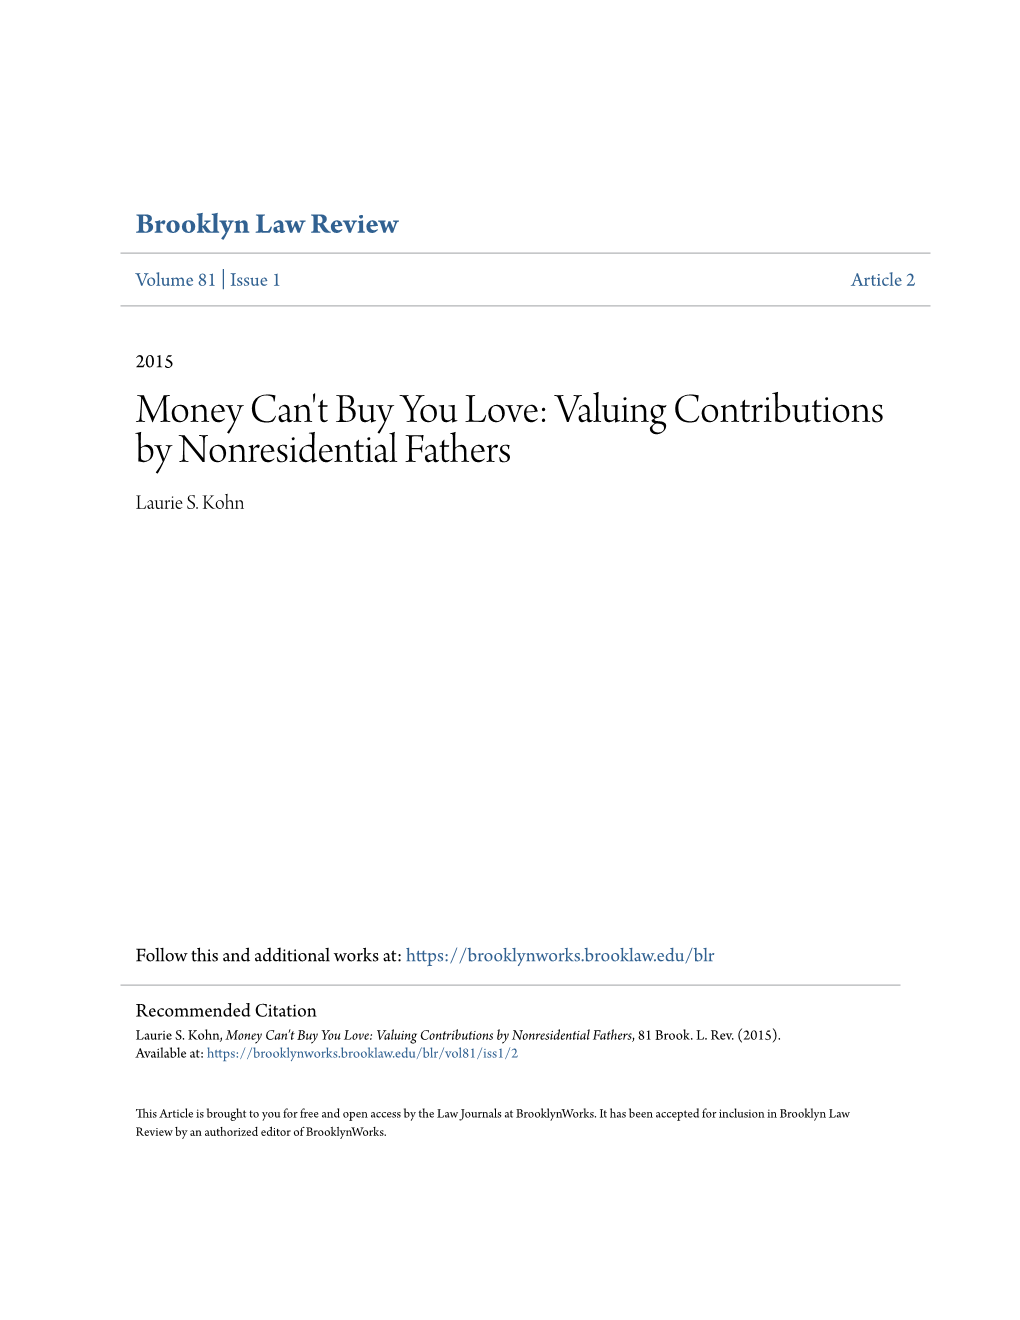 Valuing Contributions by Nonresidential Fathers Laurie S